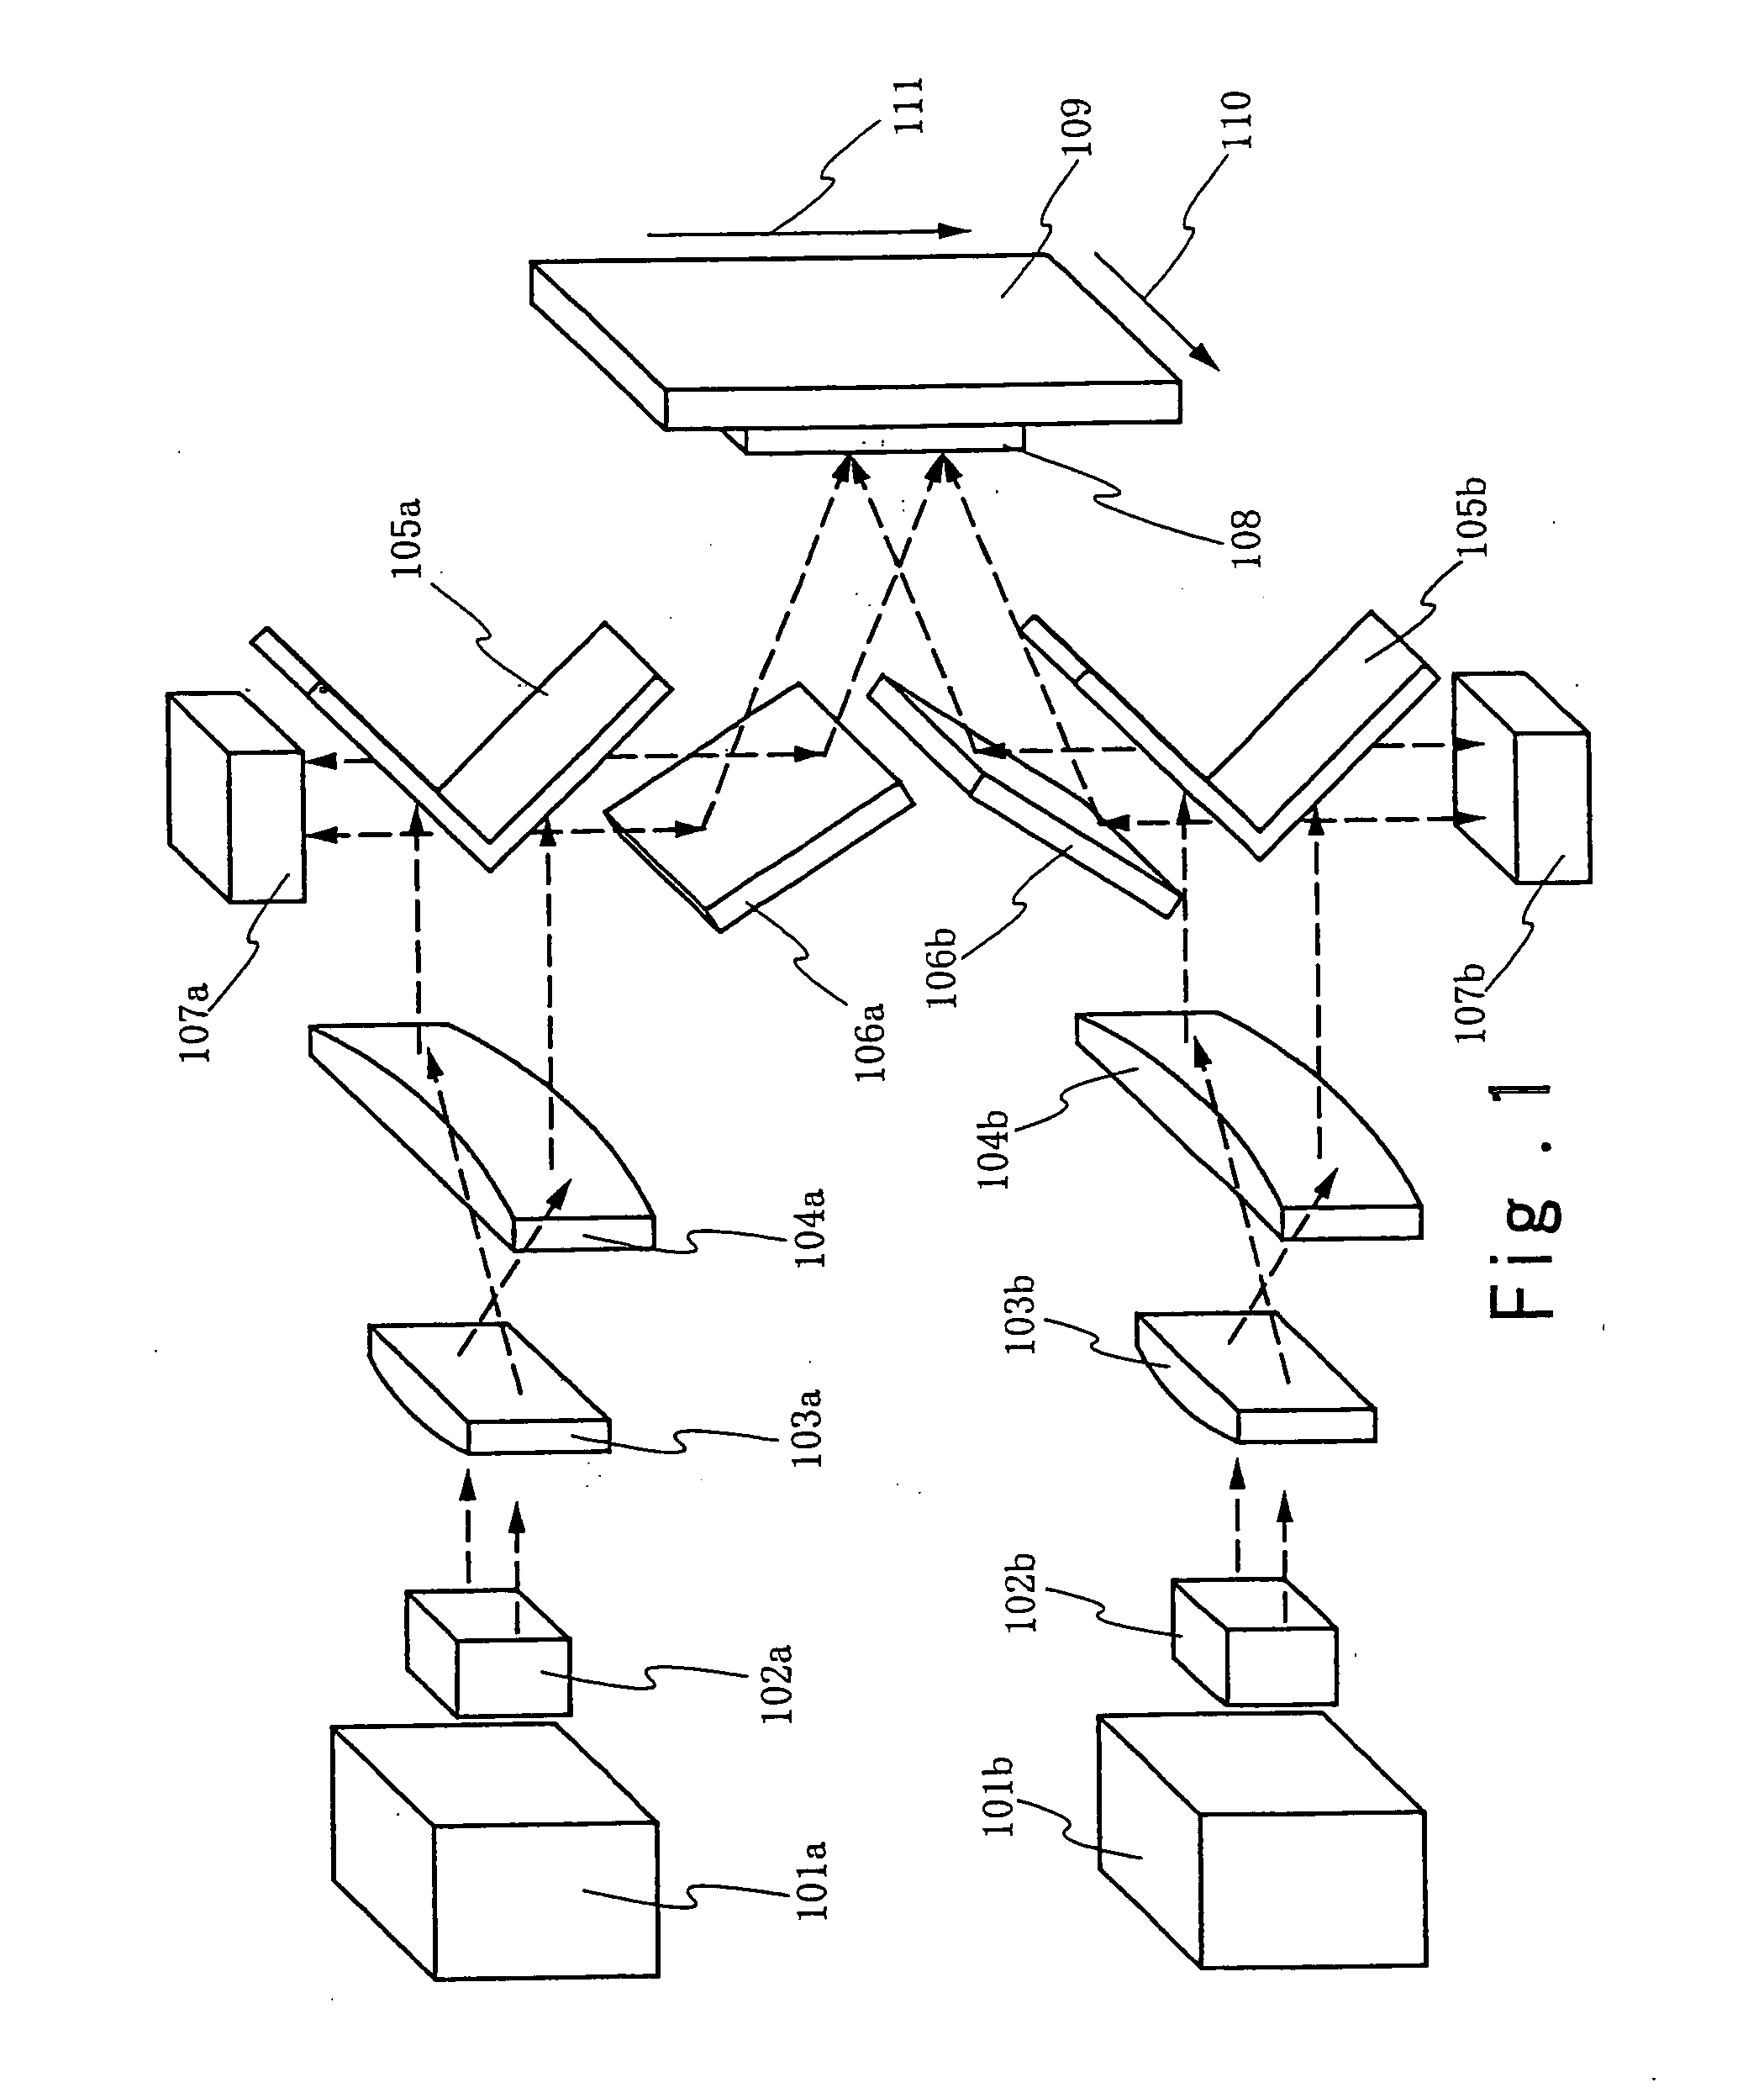 Laser irradiation method, laser irradiation apparatus, and method of manufacturing a semiconductor device